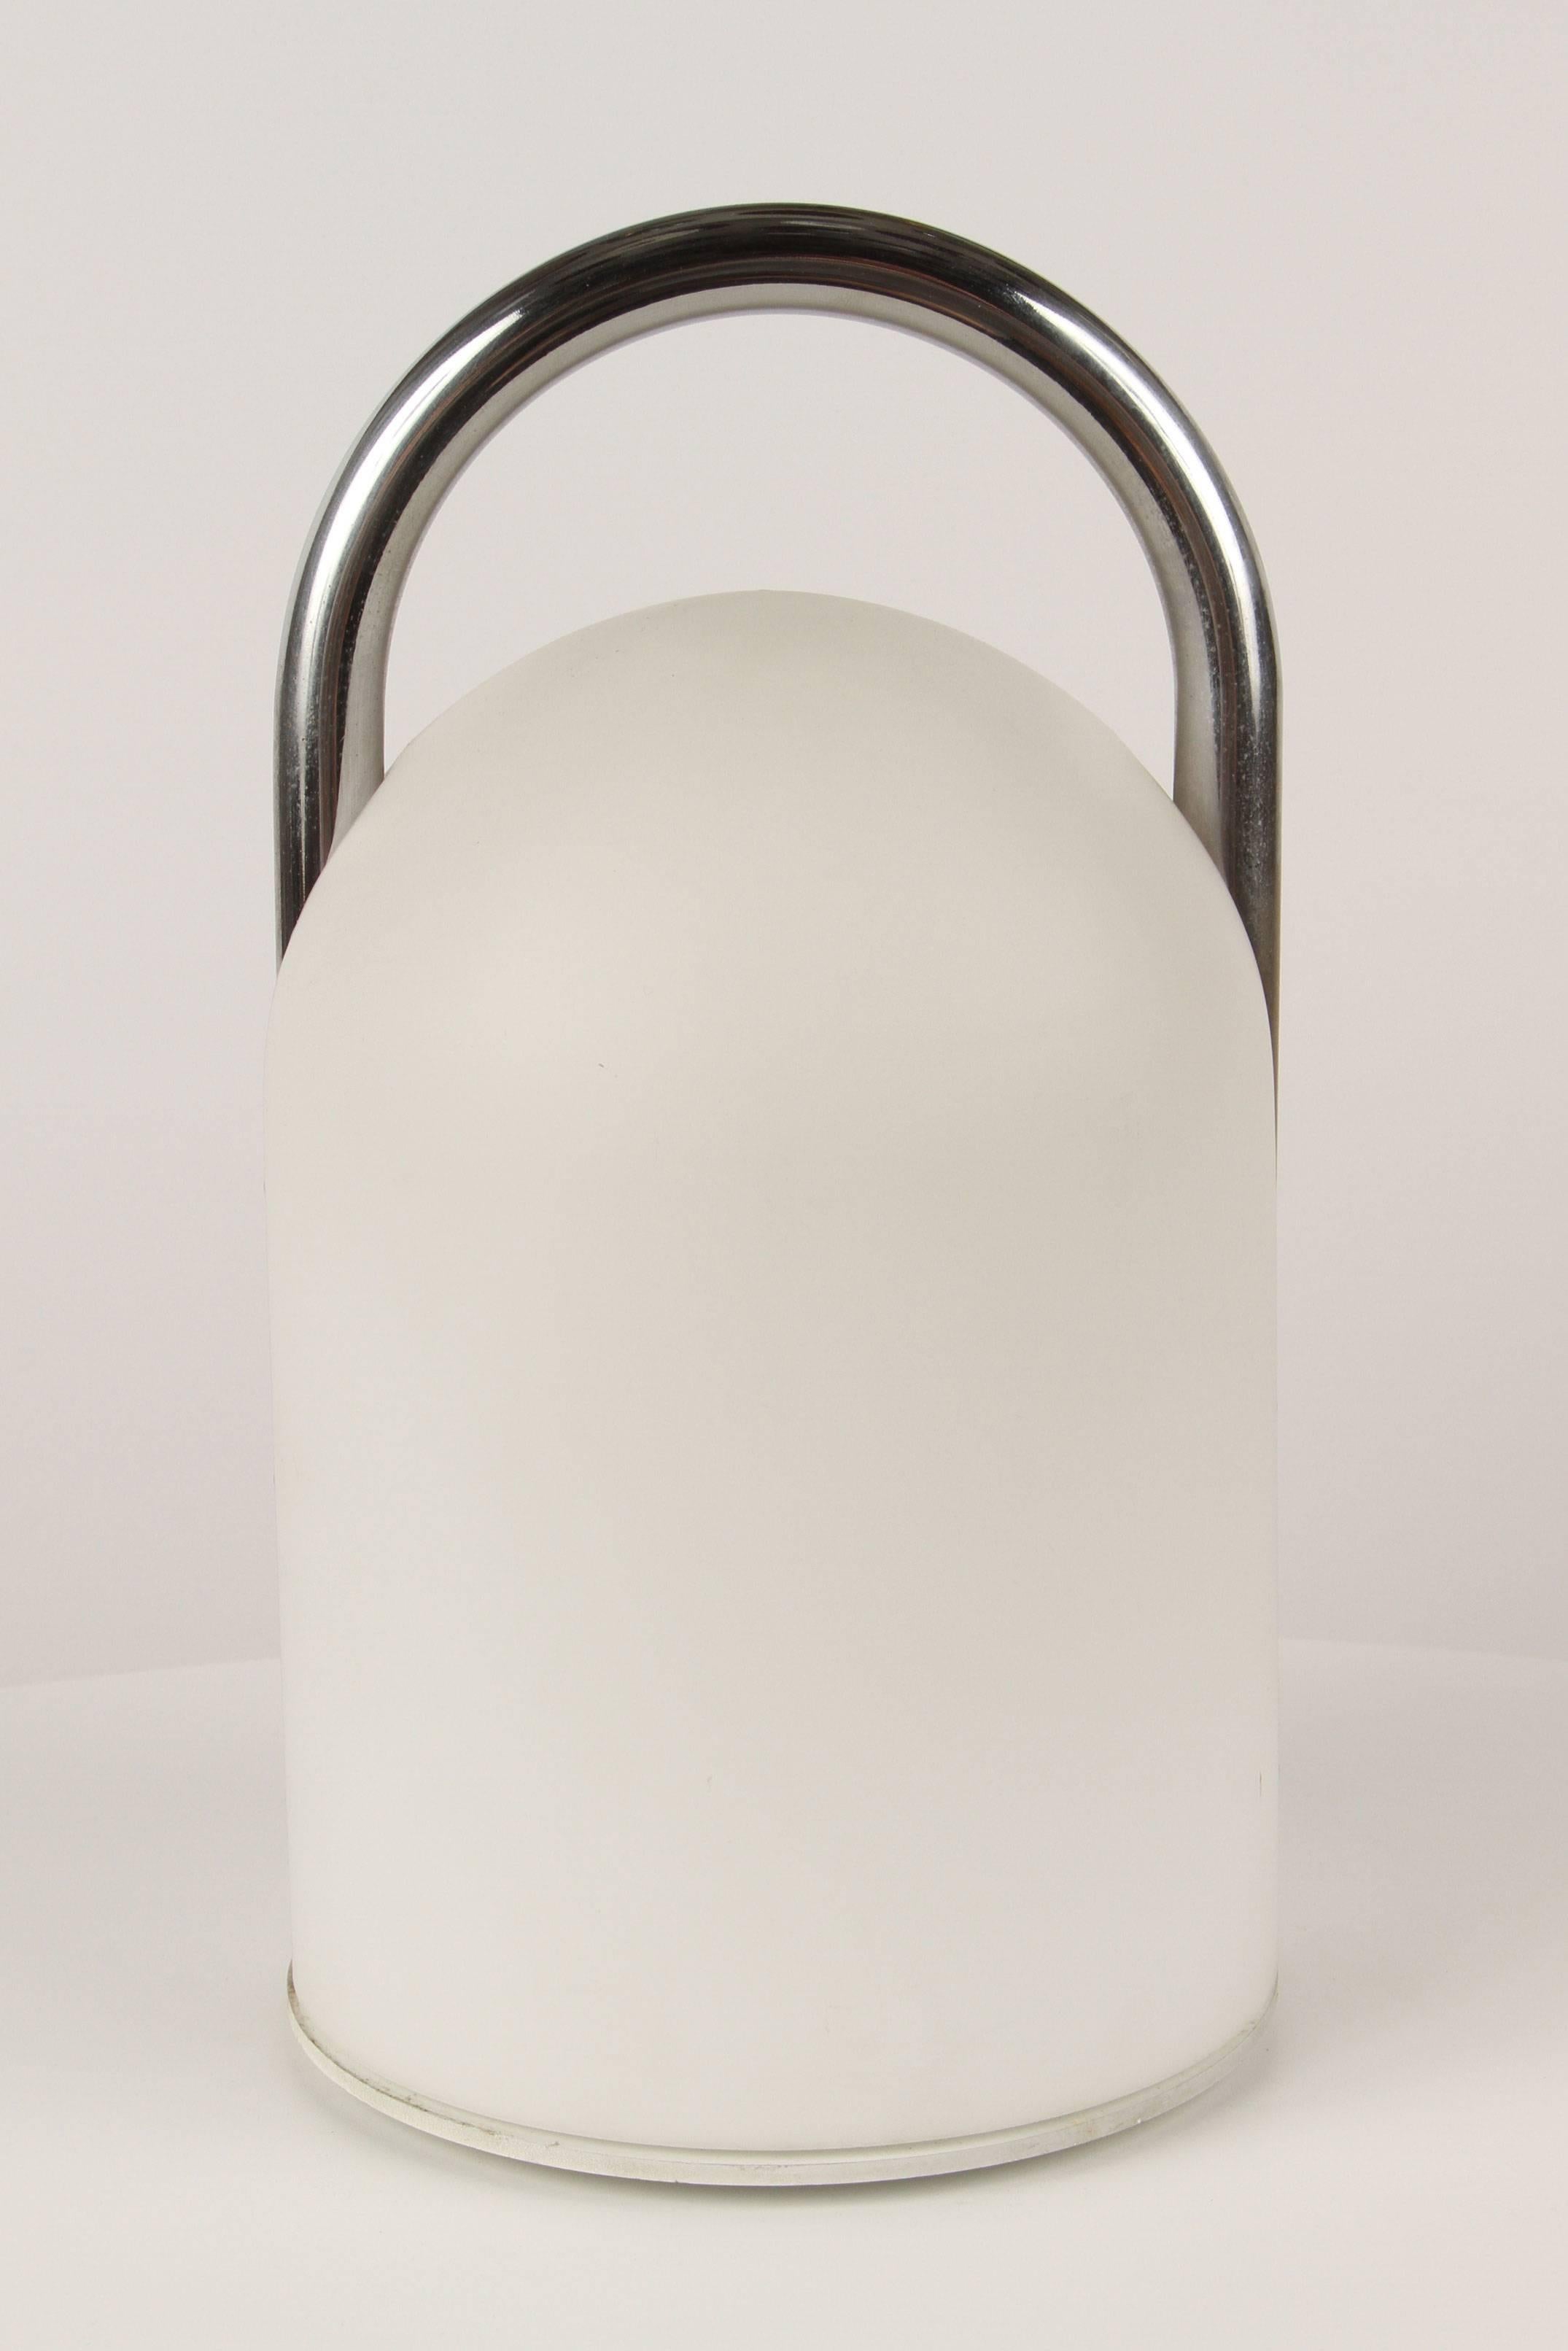 Romolo Lanciani 'Tender' table lamp for Tronconi. Executed in opaline glass and chrome, Italy, circa 1980s.

Tronconi was a major Italian lighting and design company founded by Enrico Tronconi. Previously Tronconi had designed the iconic 'Bamboo'